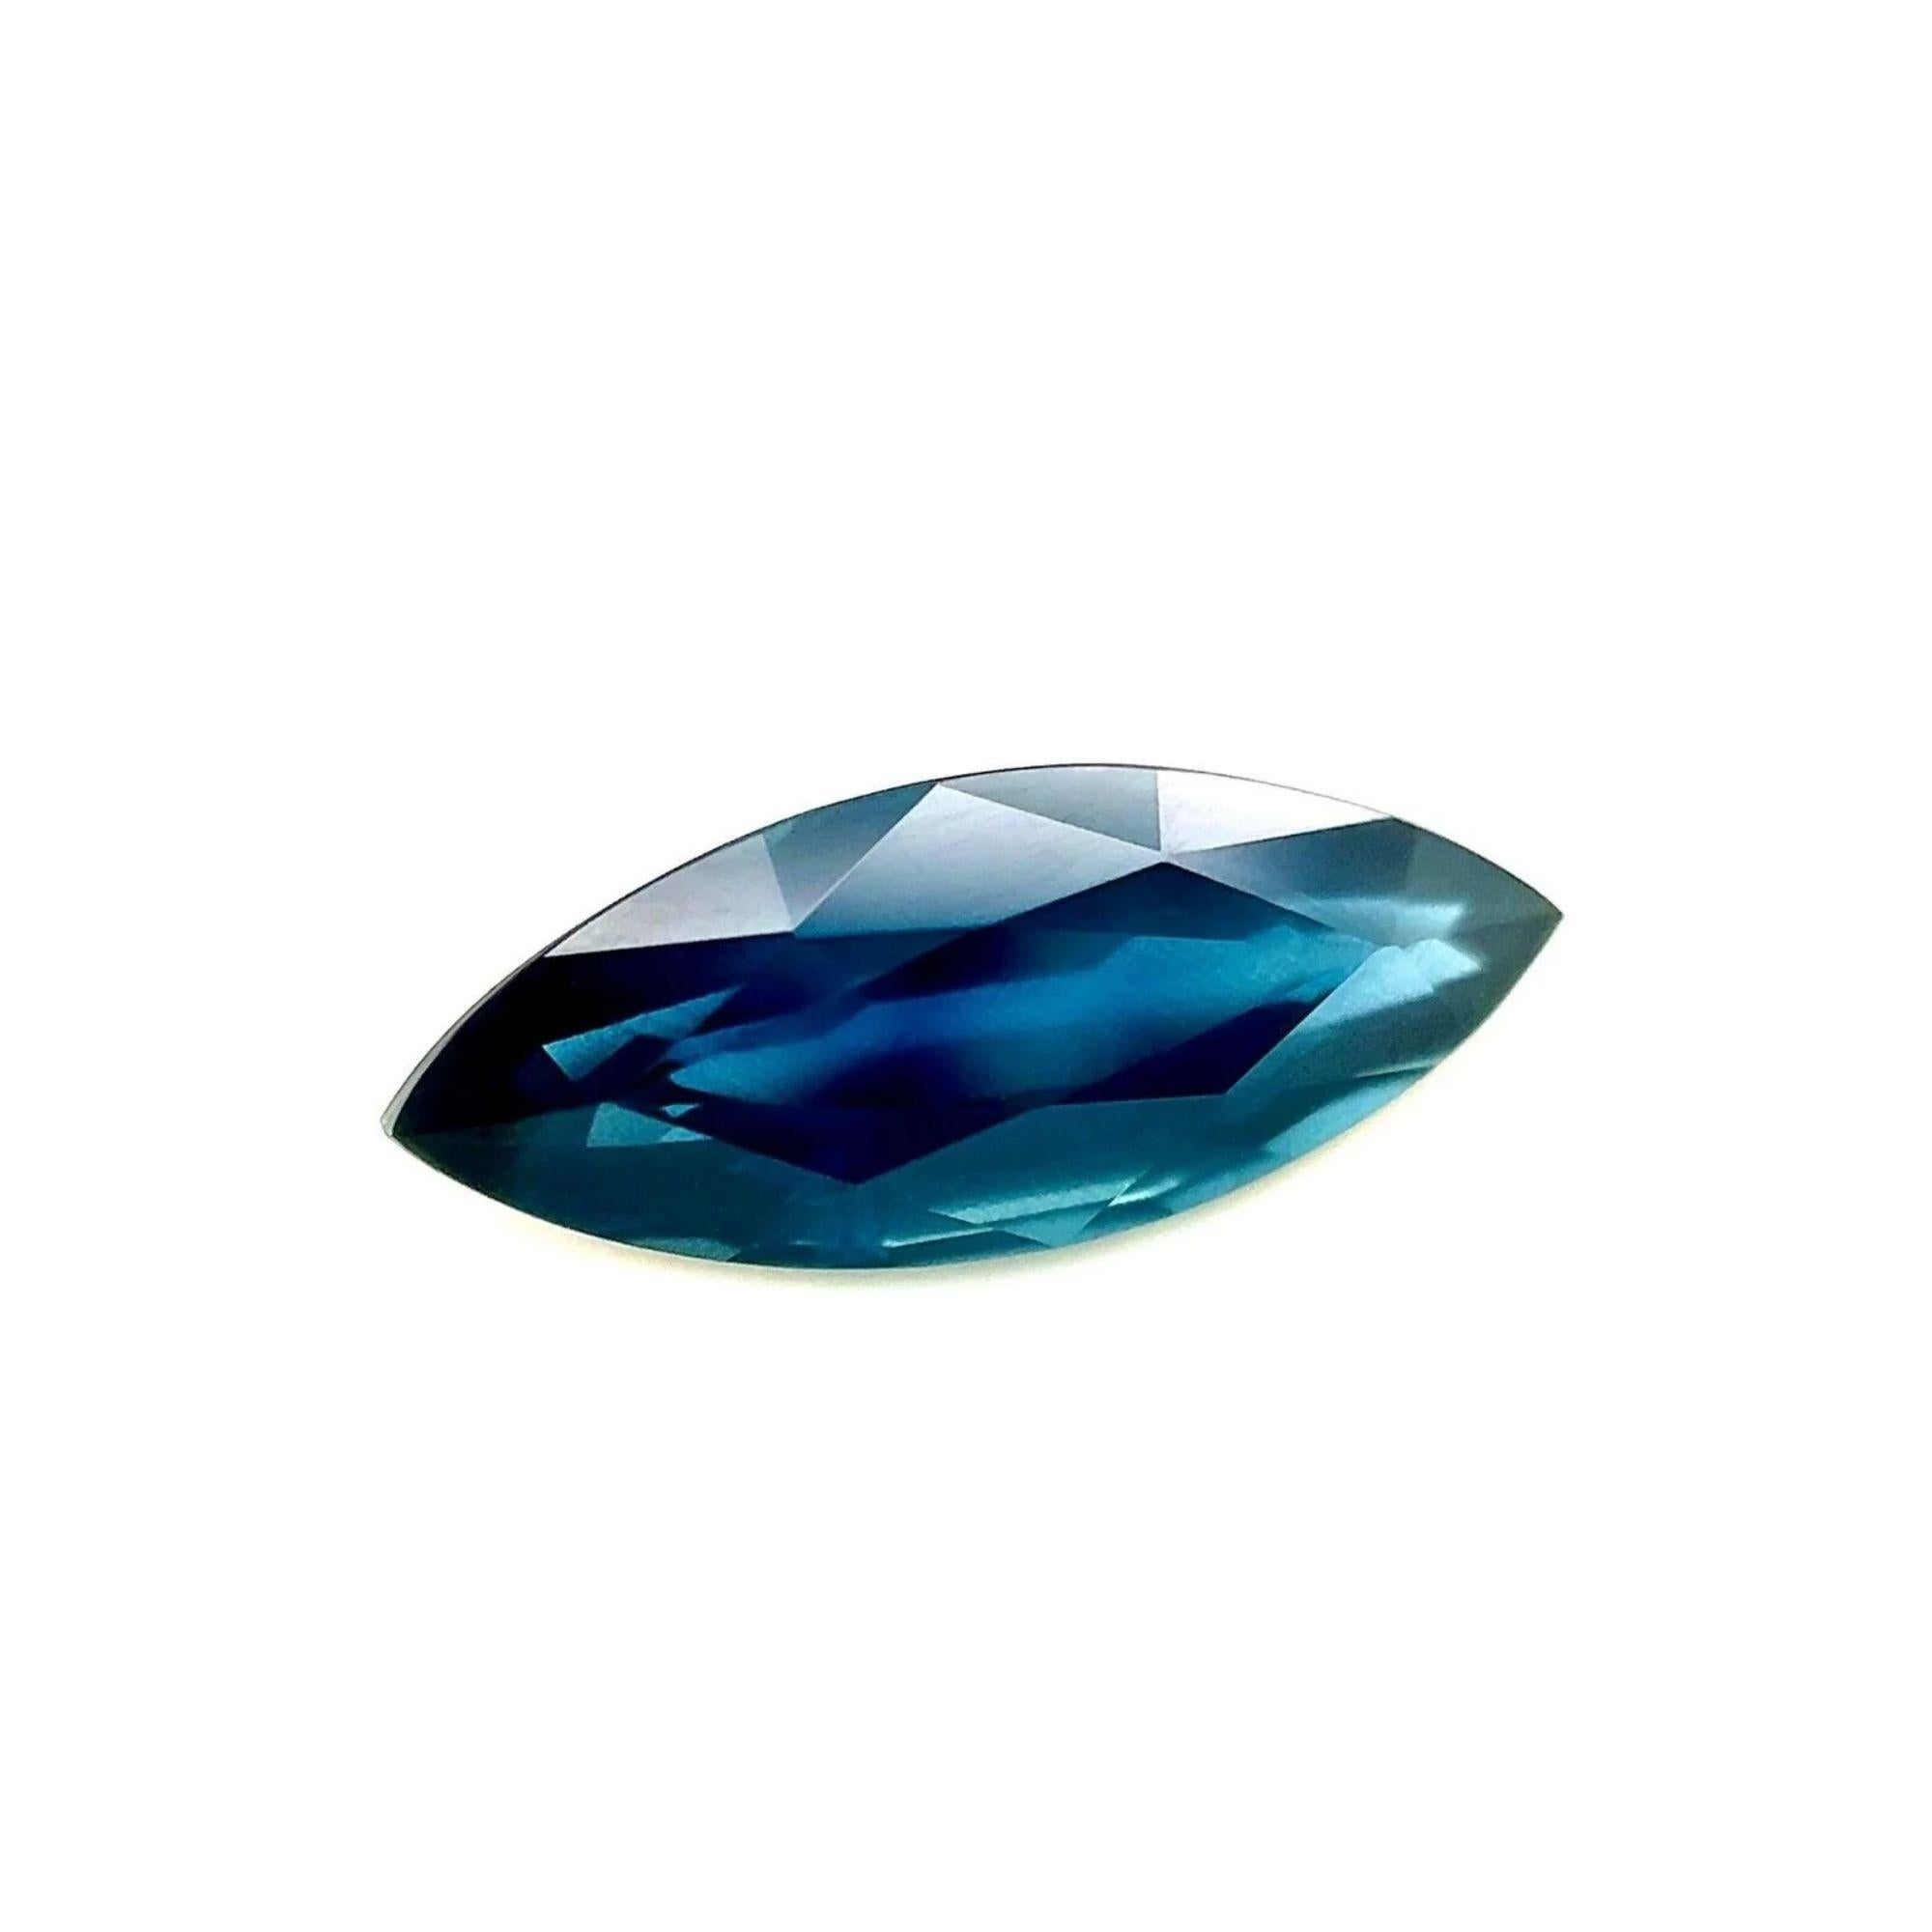 2.16ct AIG Certified Vivid Blue Sapphire Marquise Cut Rare 13.1x5.2mm Loose Gem

AIG Certified Vivid Blue Sapphire Gemstone.
2.16 Carat sapphire with a beautiful vivid blue colour. Fully certified by AIG confirming stone as natural.
Also has very